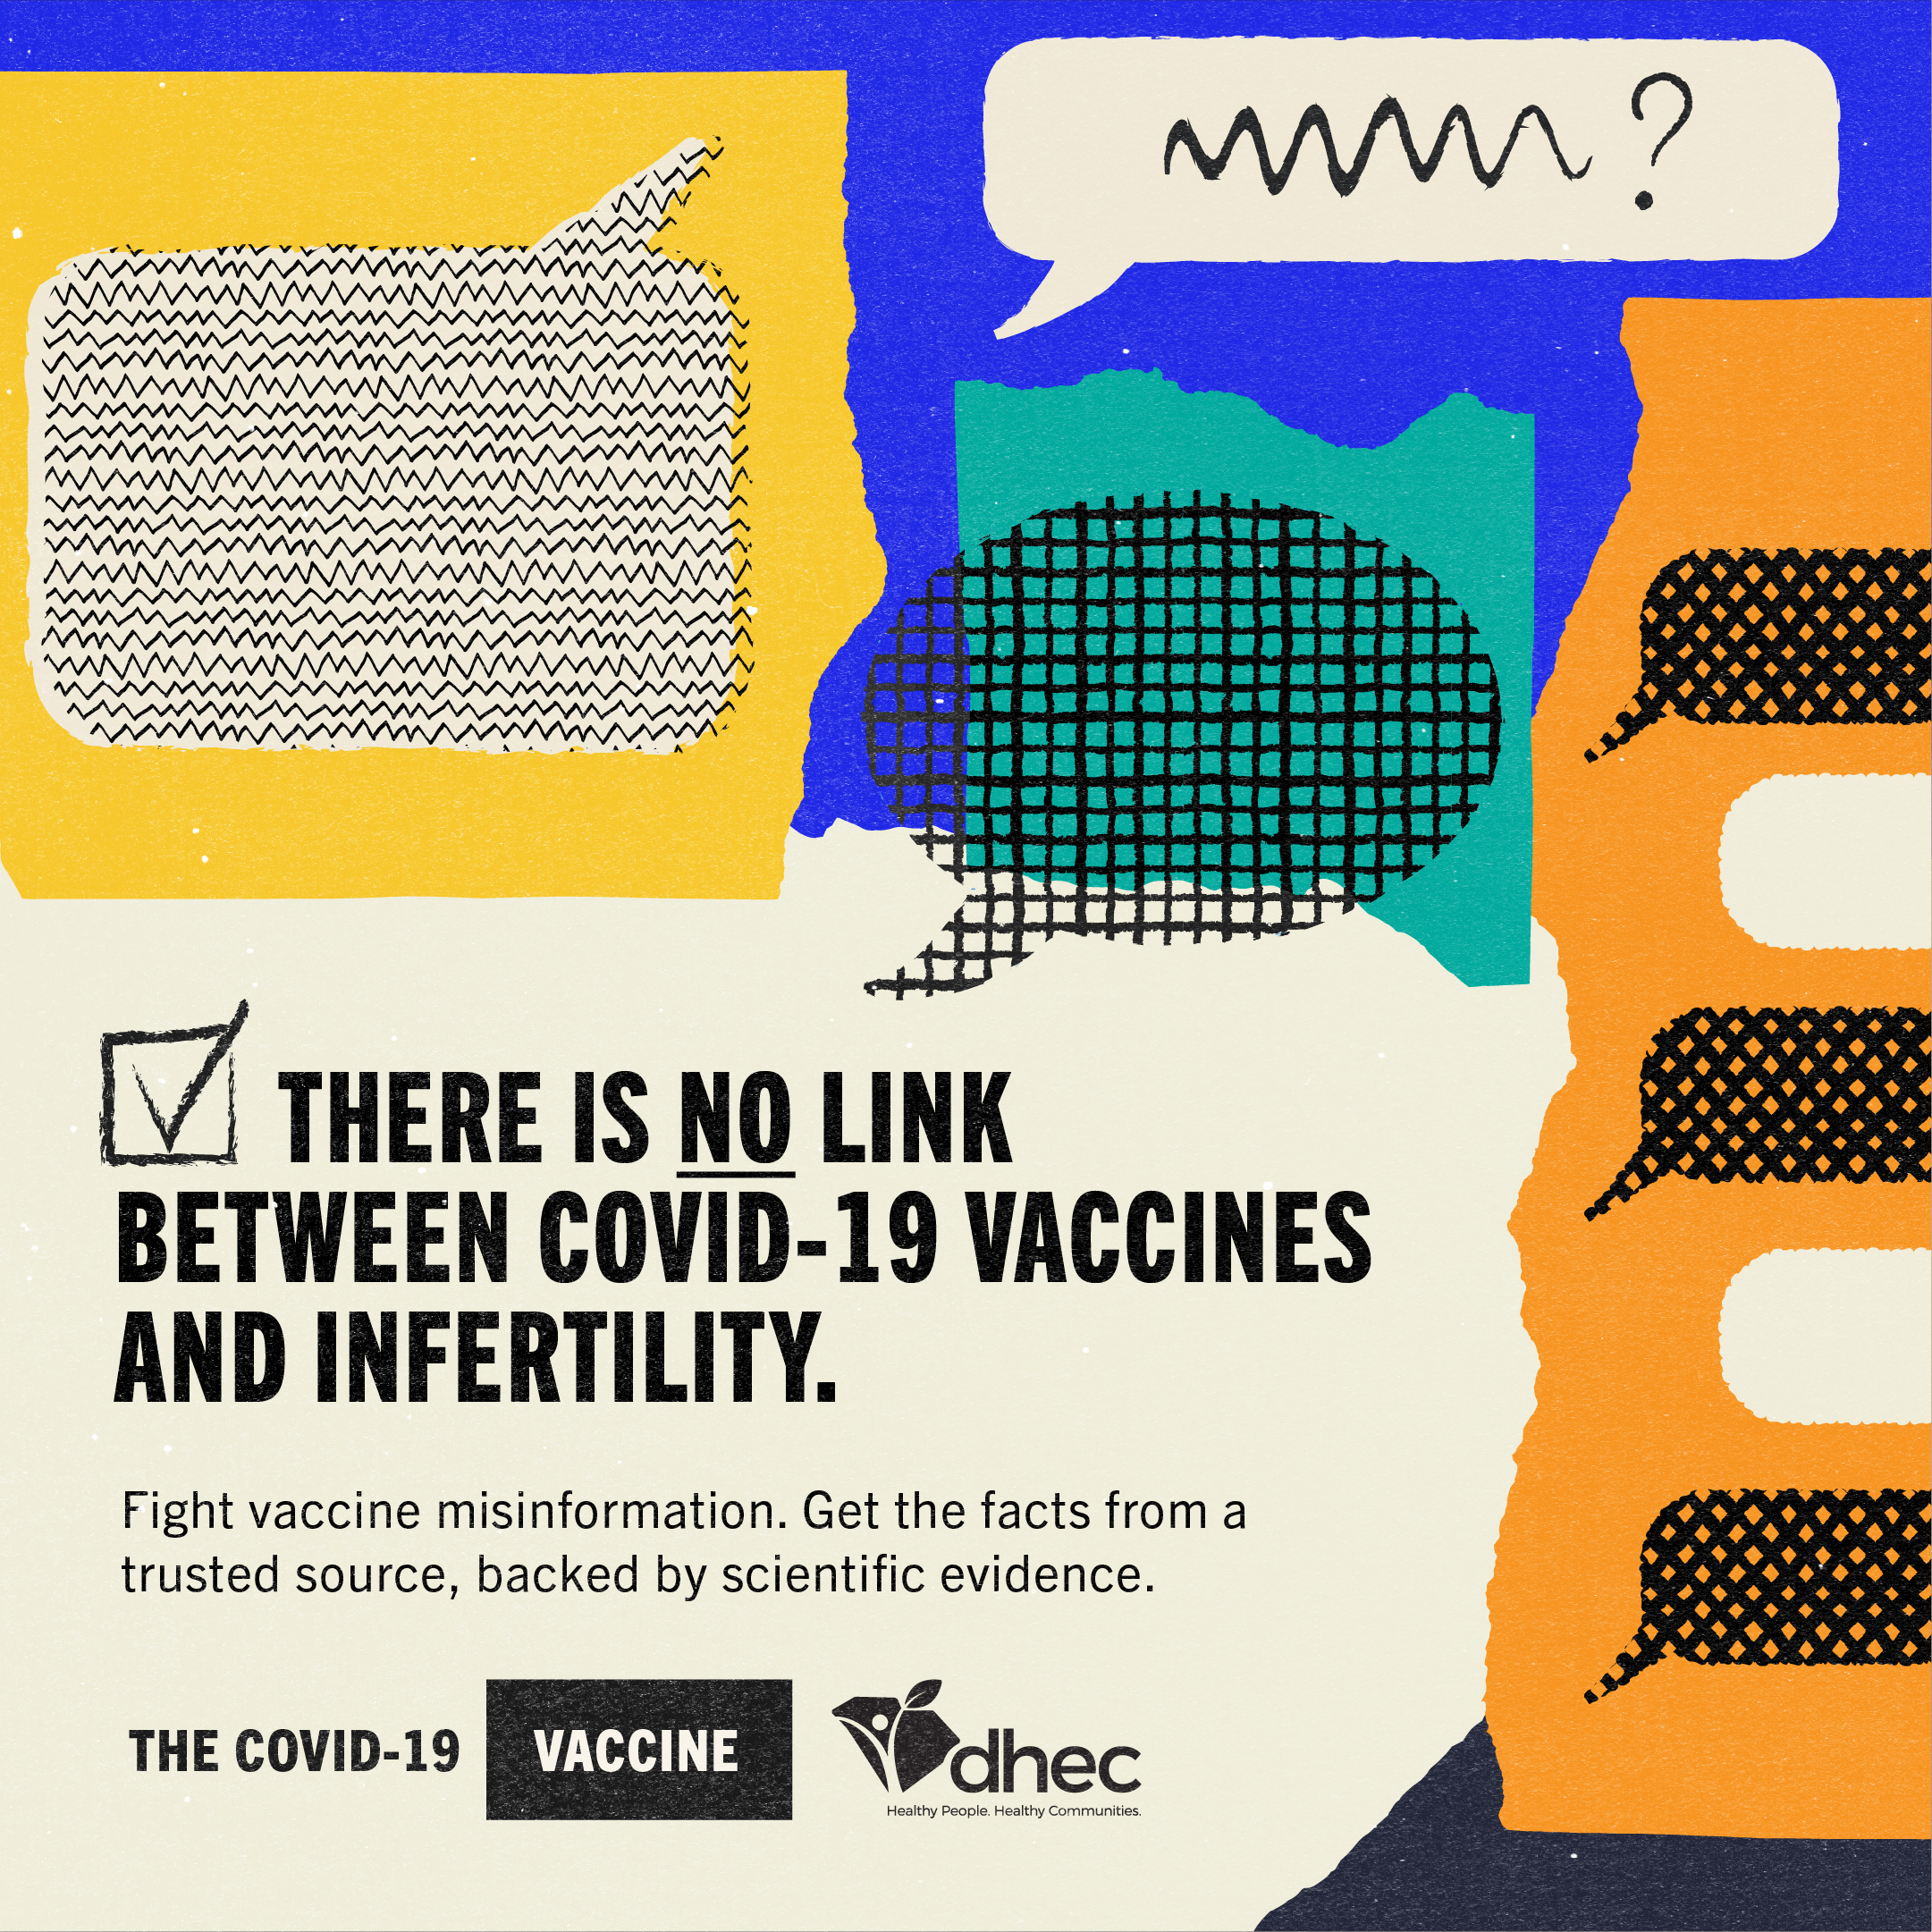 There is NO link between COVID-19 vaccines and infertility.